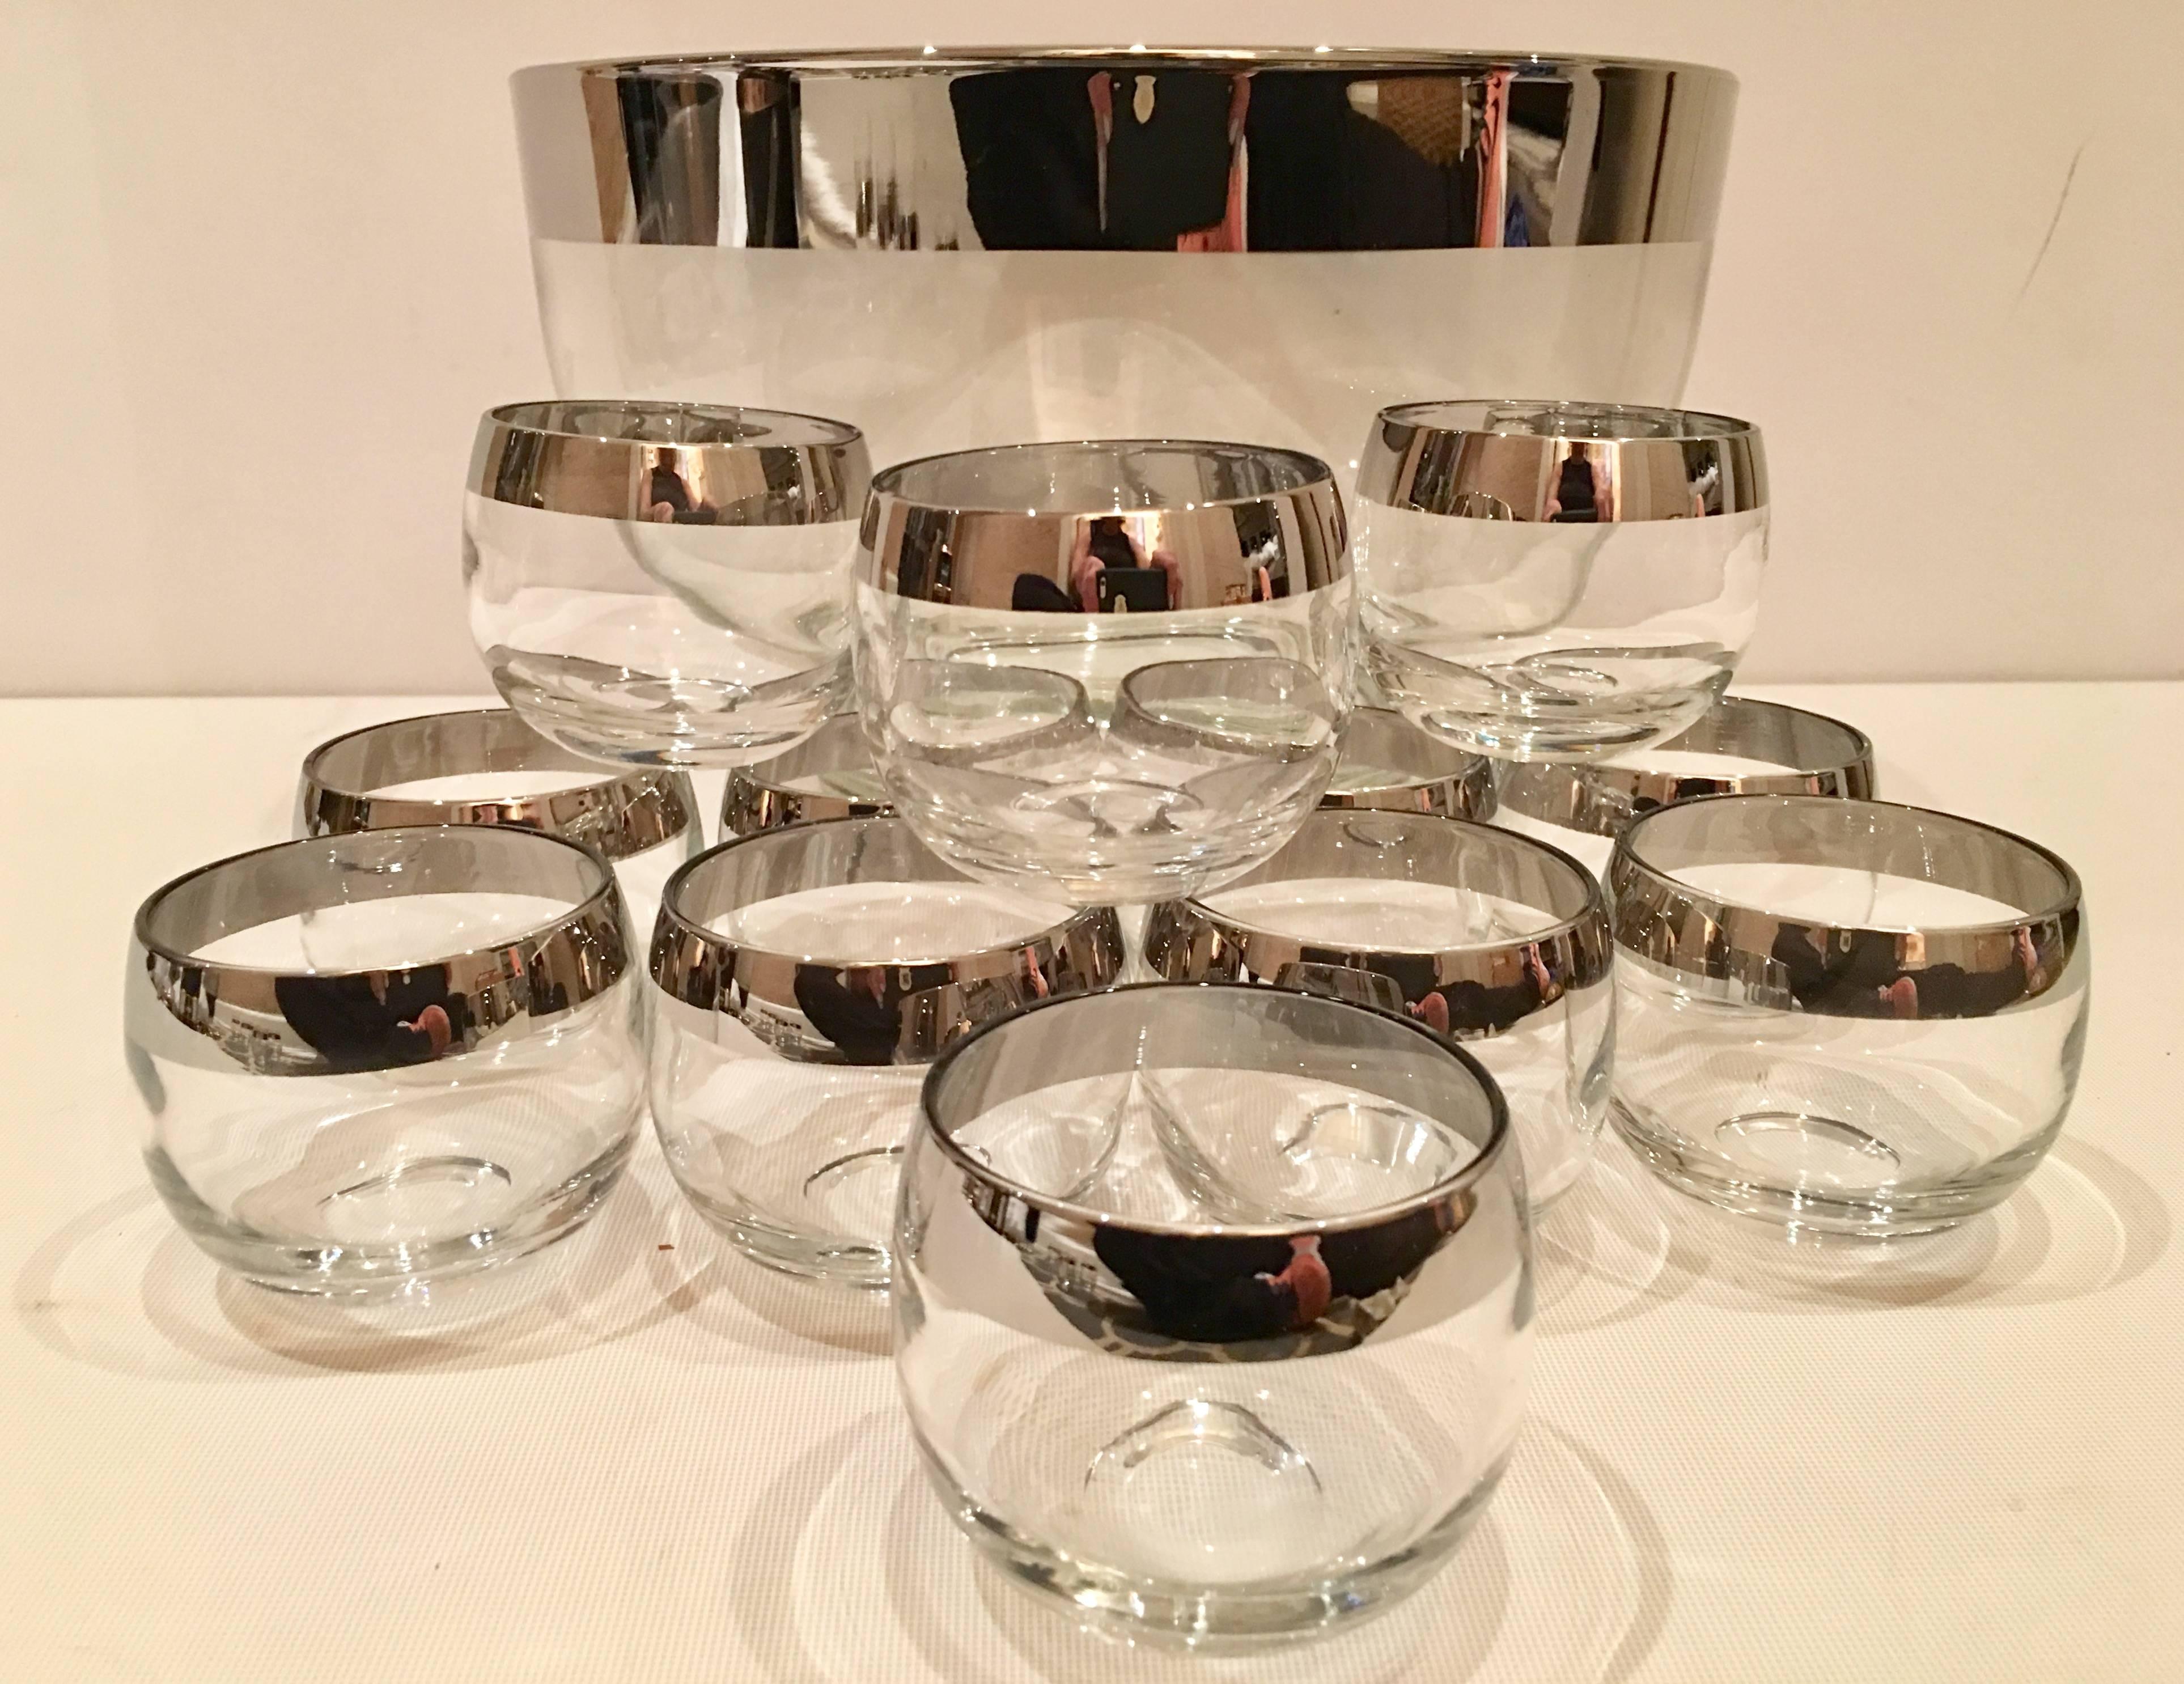 Mid-Century Modern 13 piece drinks set by, Dorothy Thorpe. Set features clear glass with a large sterling silver overlay band detail. Set includes, one large punch or serving bowl and 12 roly poly style glasses. Glasses measure, 2.5" height